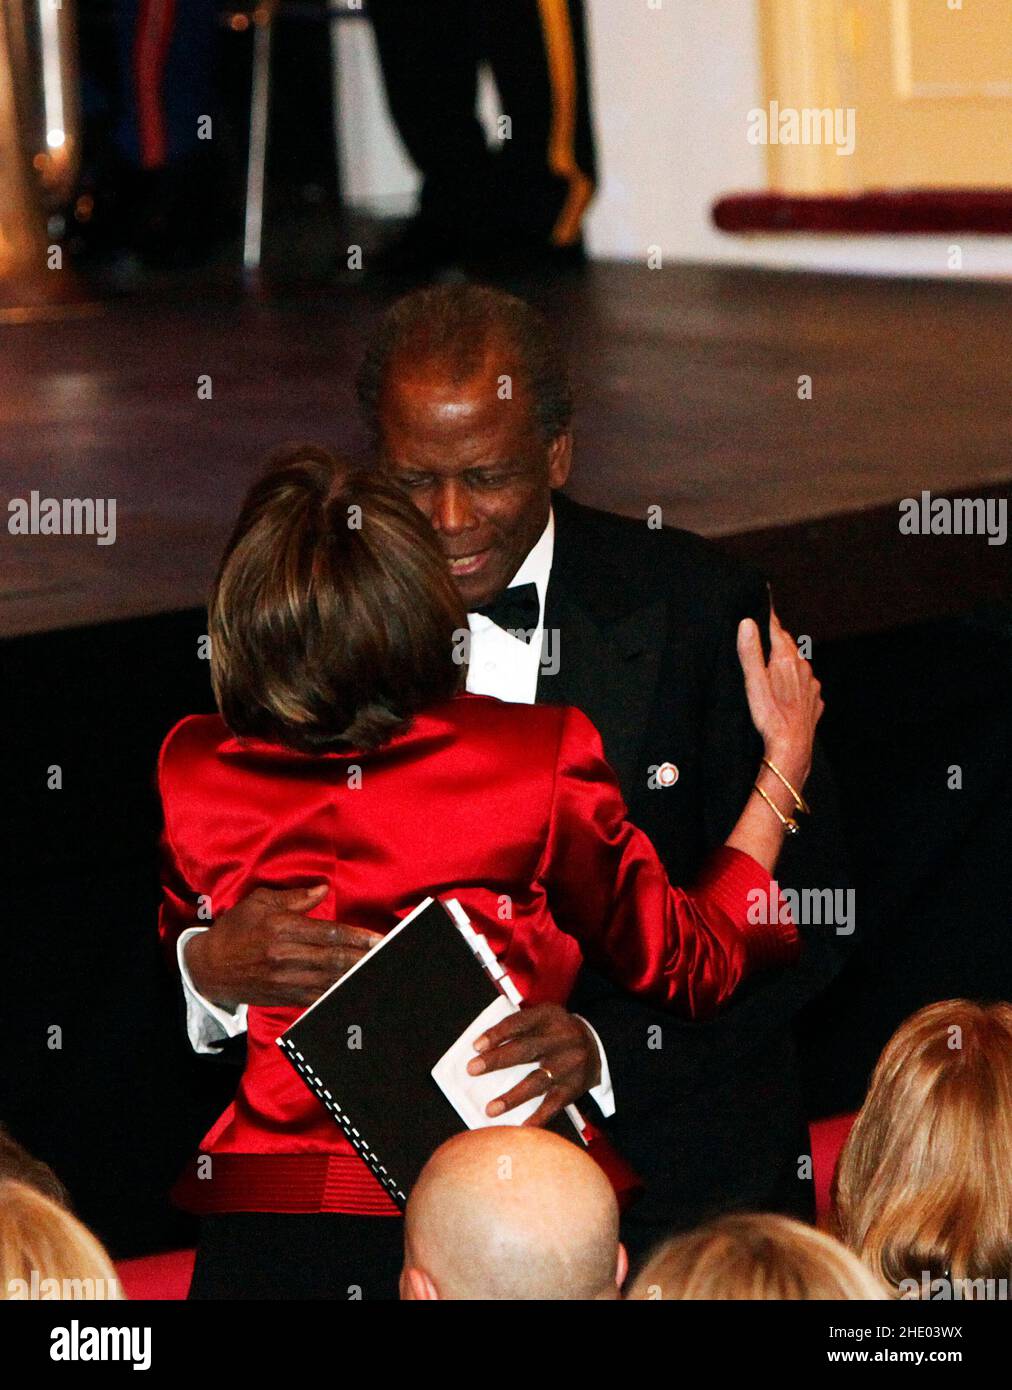 File photo - Washington, DC - February 11, 2009 -- United States Speaker of the House Nancy Pelosi (Democrat of California), greets actor Sydney Poitier at the Ford's Theater reopening celebration, Washington, DC, Wednesday, February 11, 2009. The theater underwent an 18 month renovation. - Sidney Poitier, legend and first black best actor Oscar winner, dead at 94. Photo by Aude Guerrucci - Pool via CNP /ABACAPRESS.COM Credit: Abaca Press/Alamy Live News Stock Photo